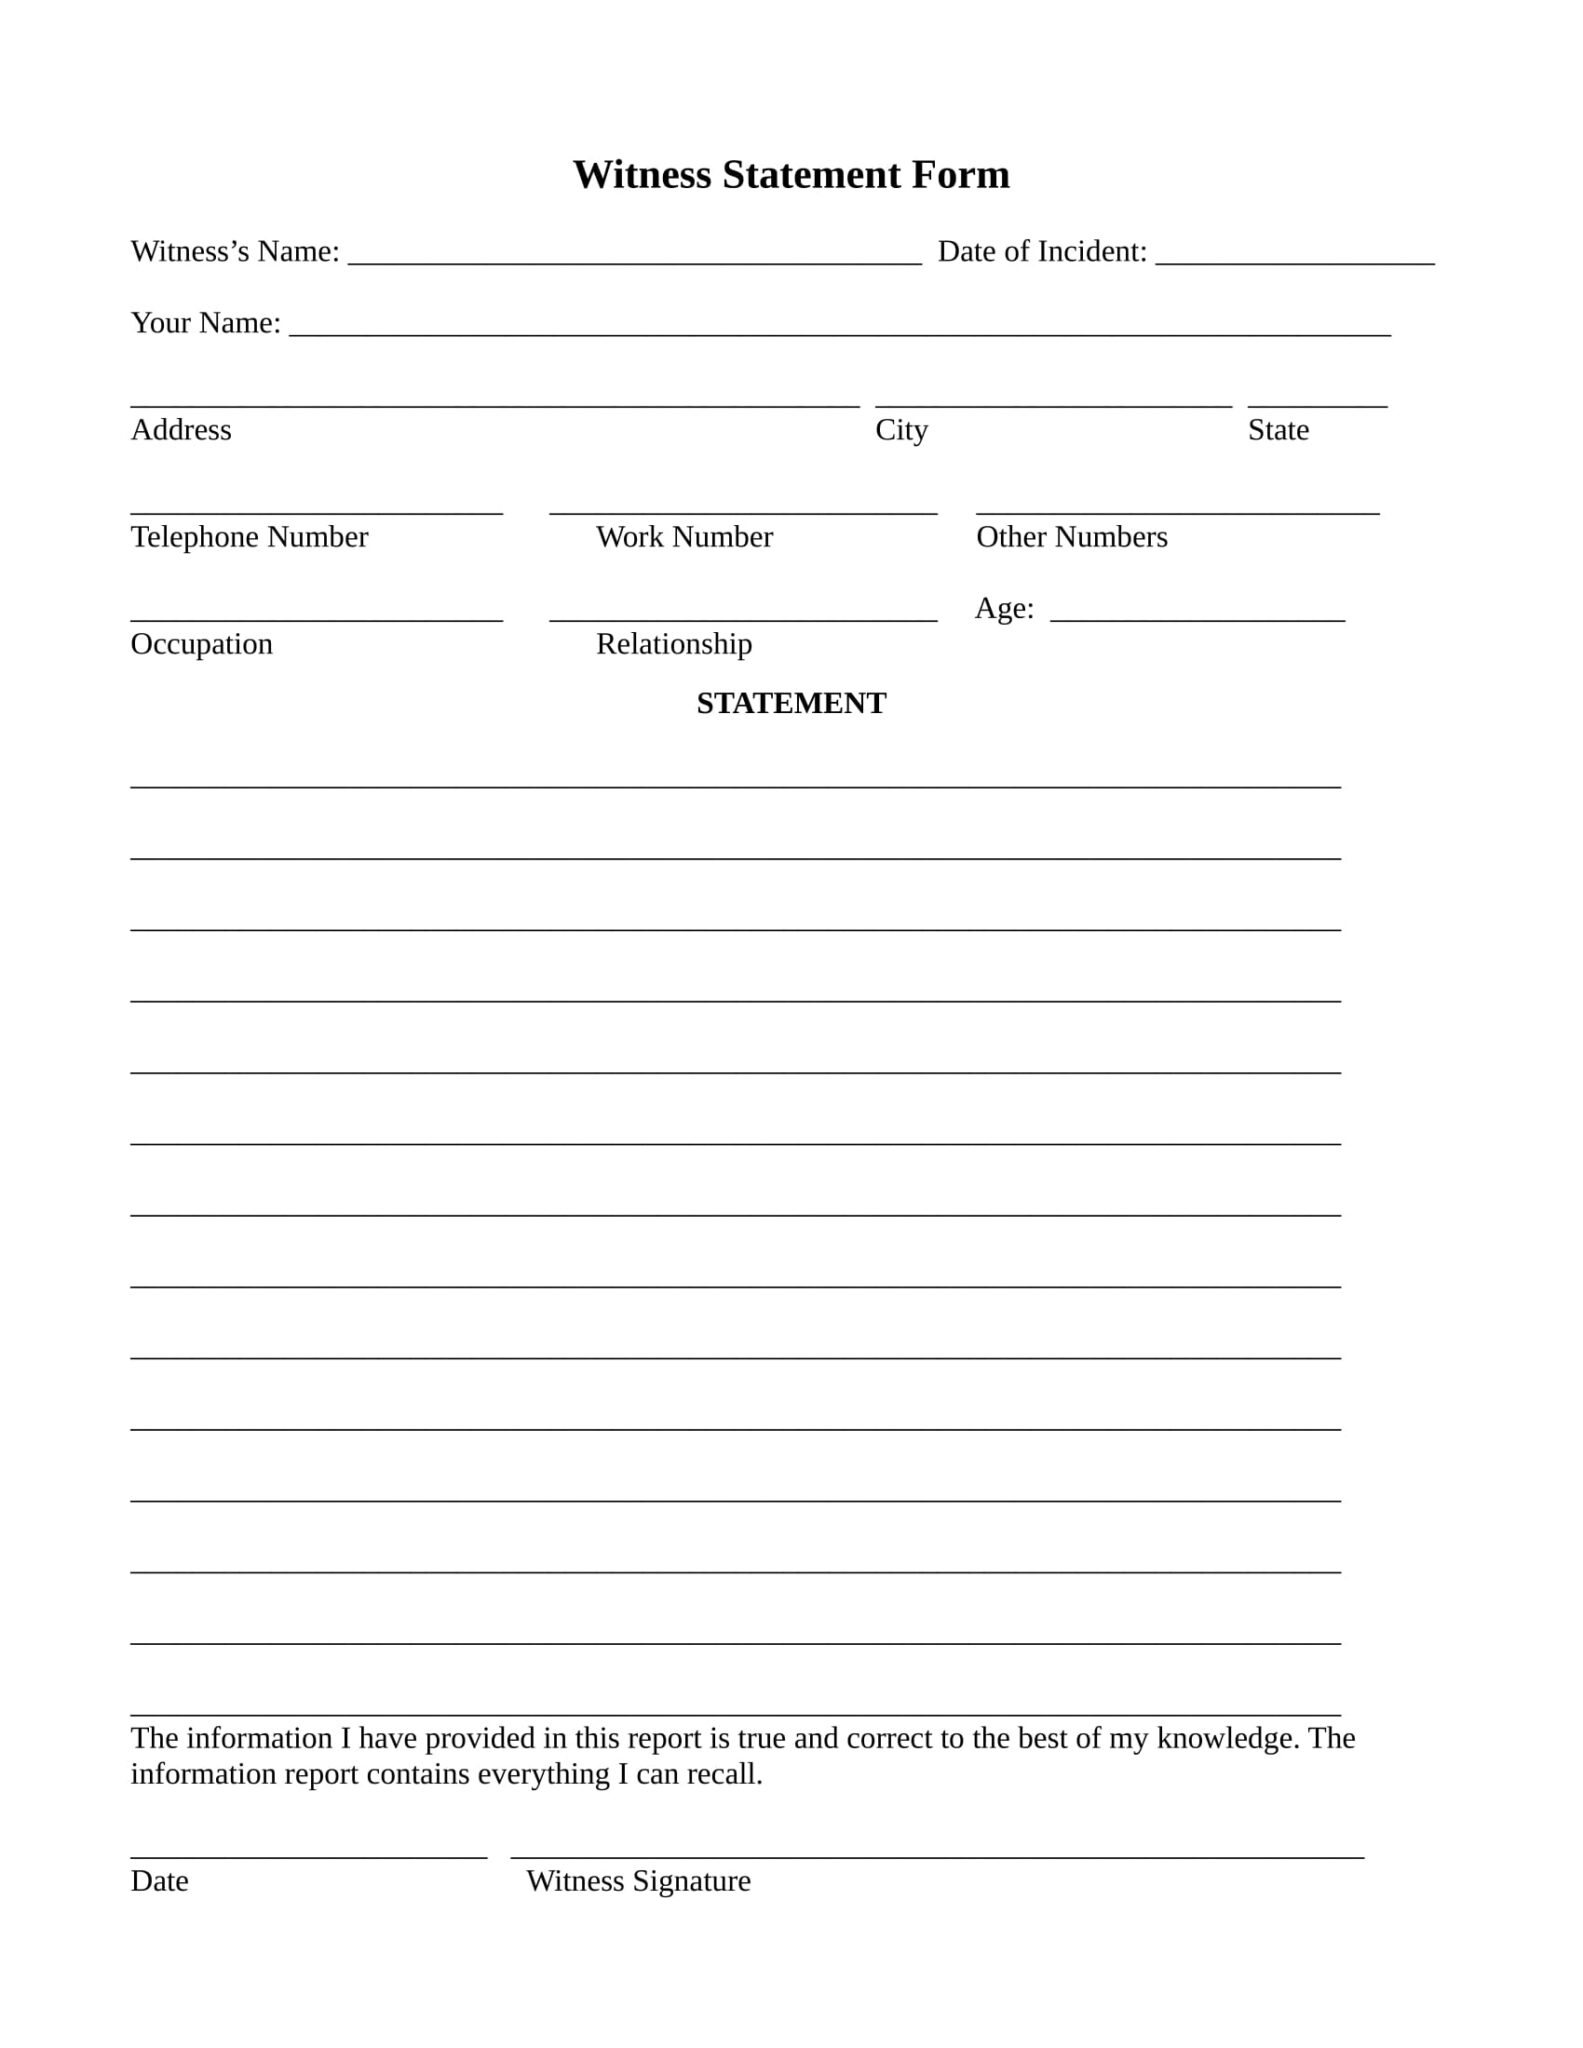 employee-witness-statement-forms-in-word-pdf-word-employee